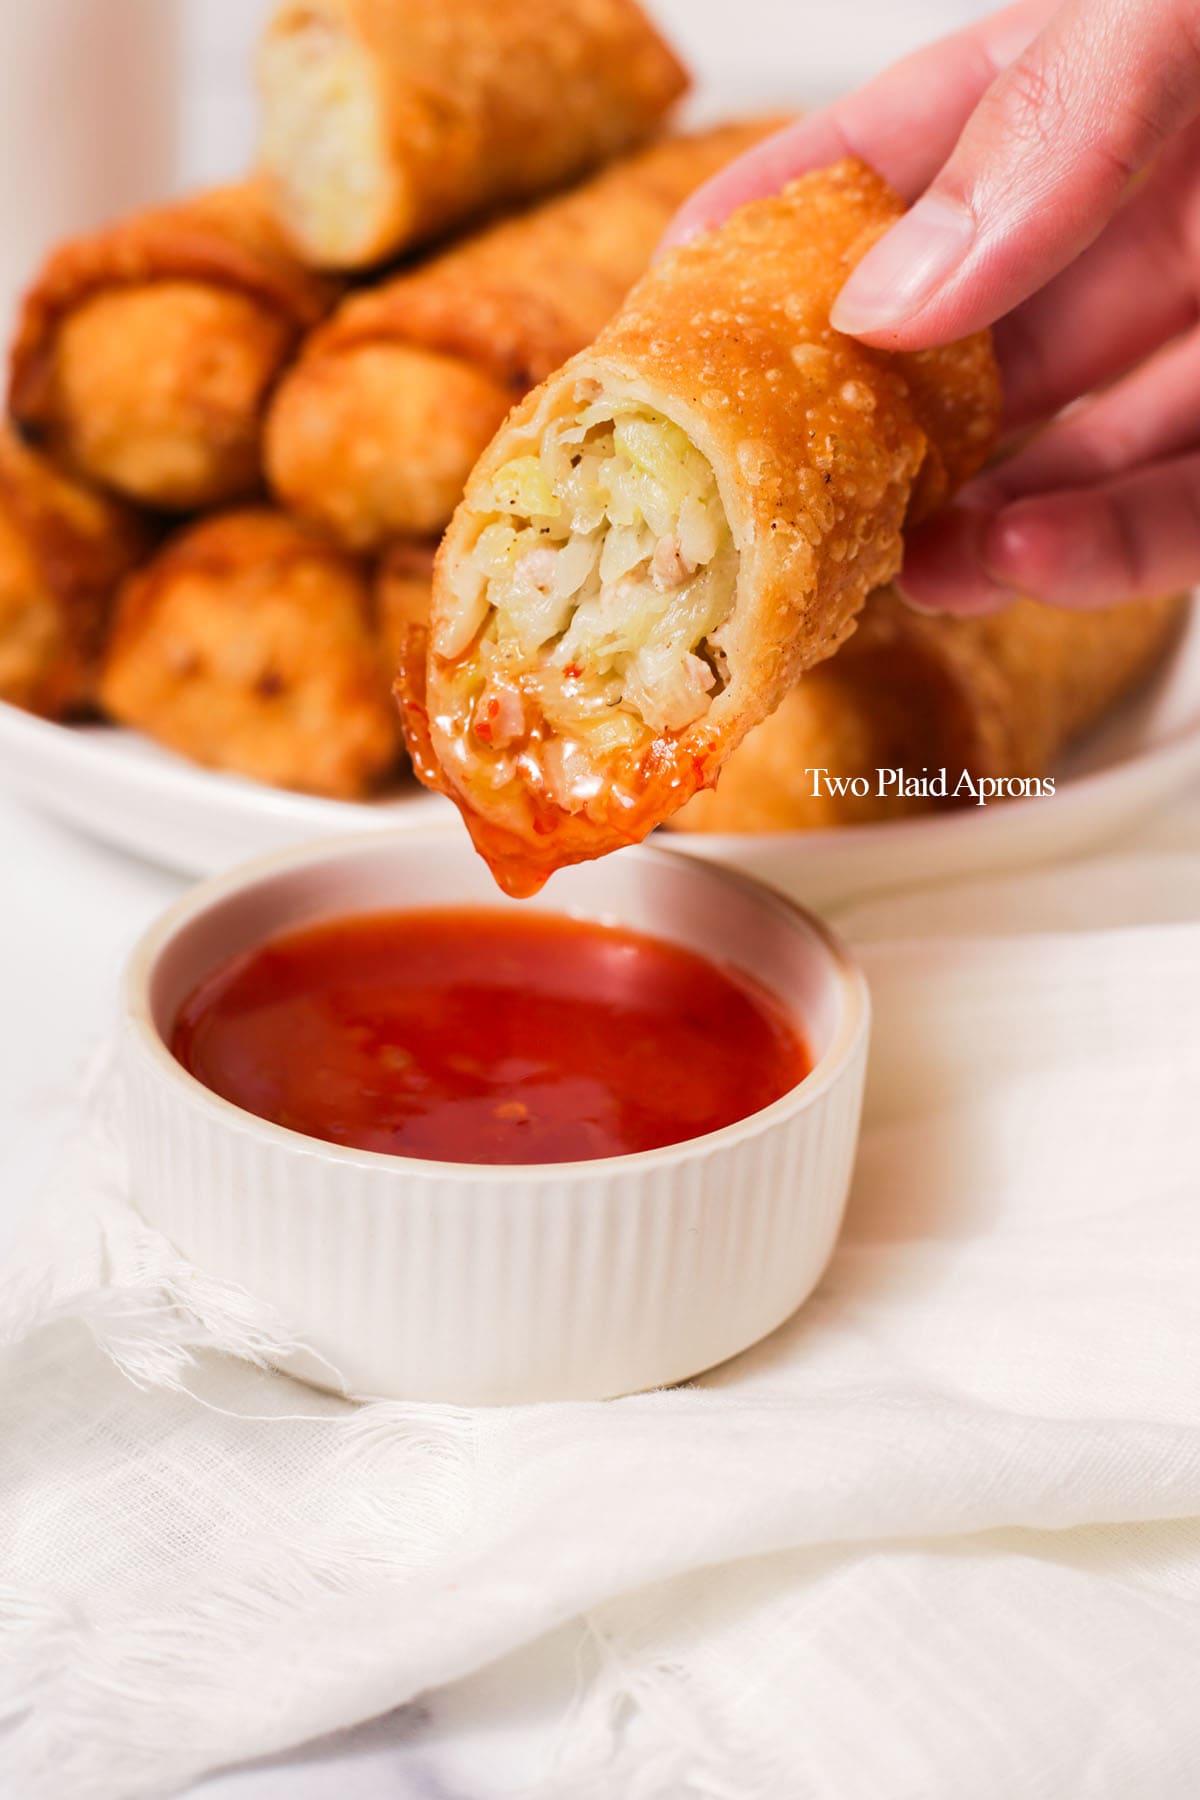 Chinese egg rolls dipped in sweet and sour sauce.